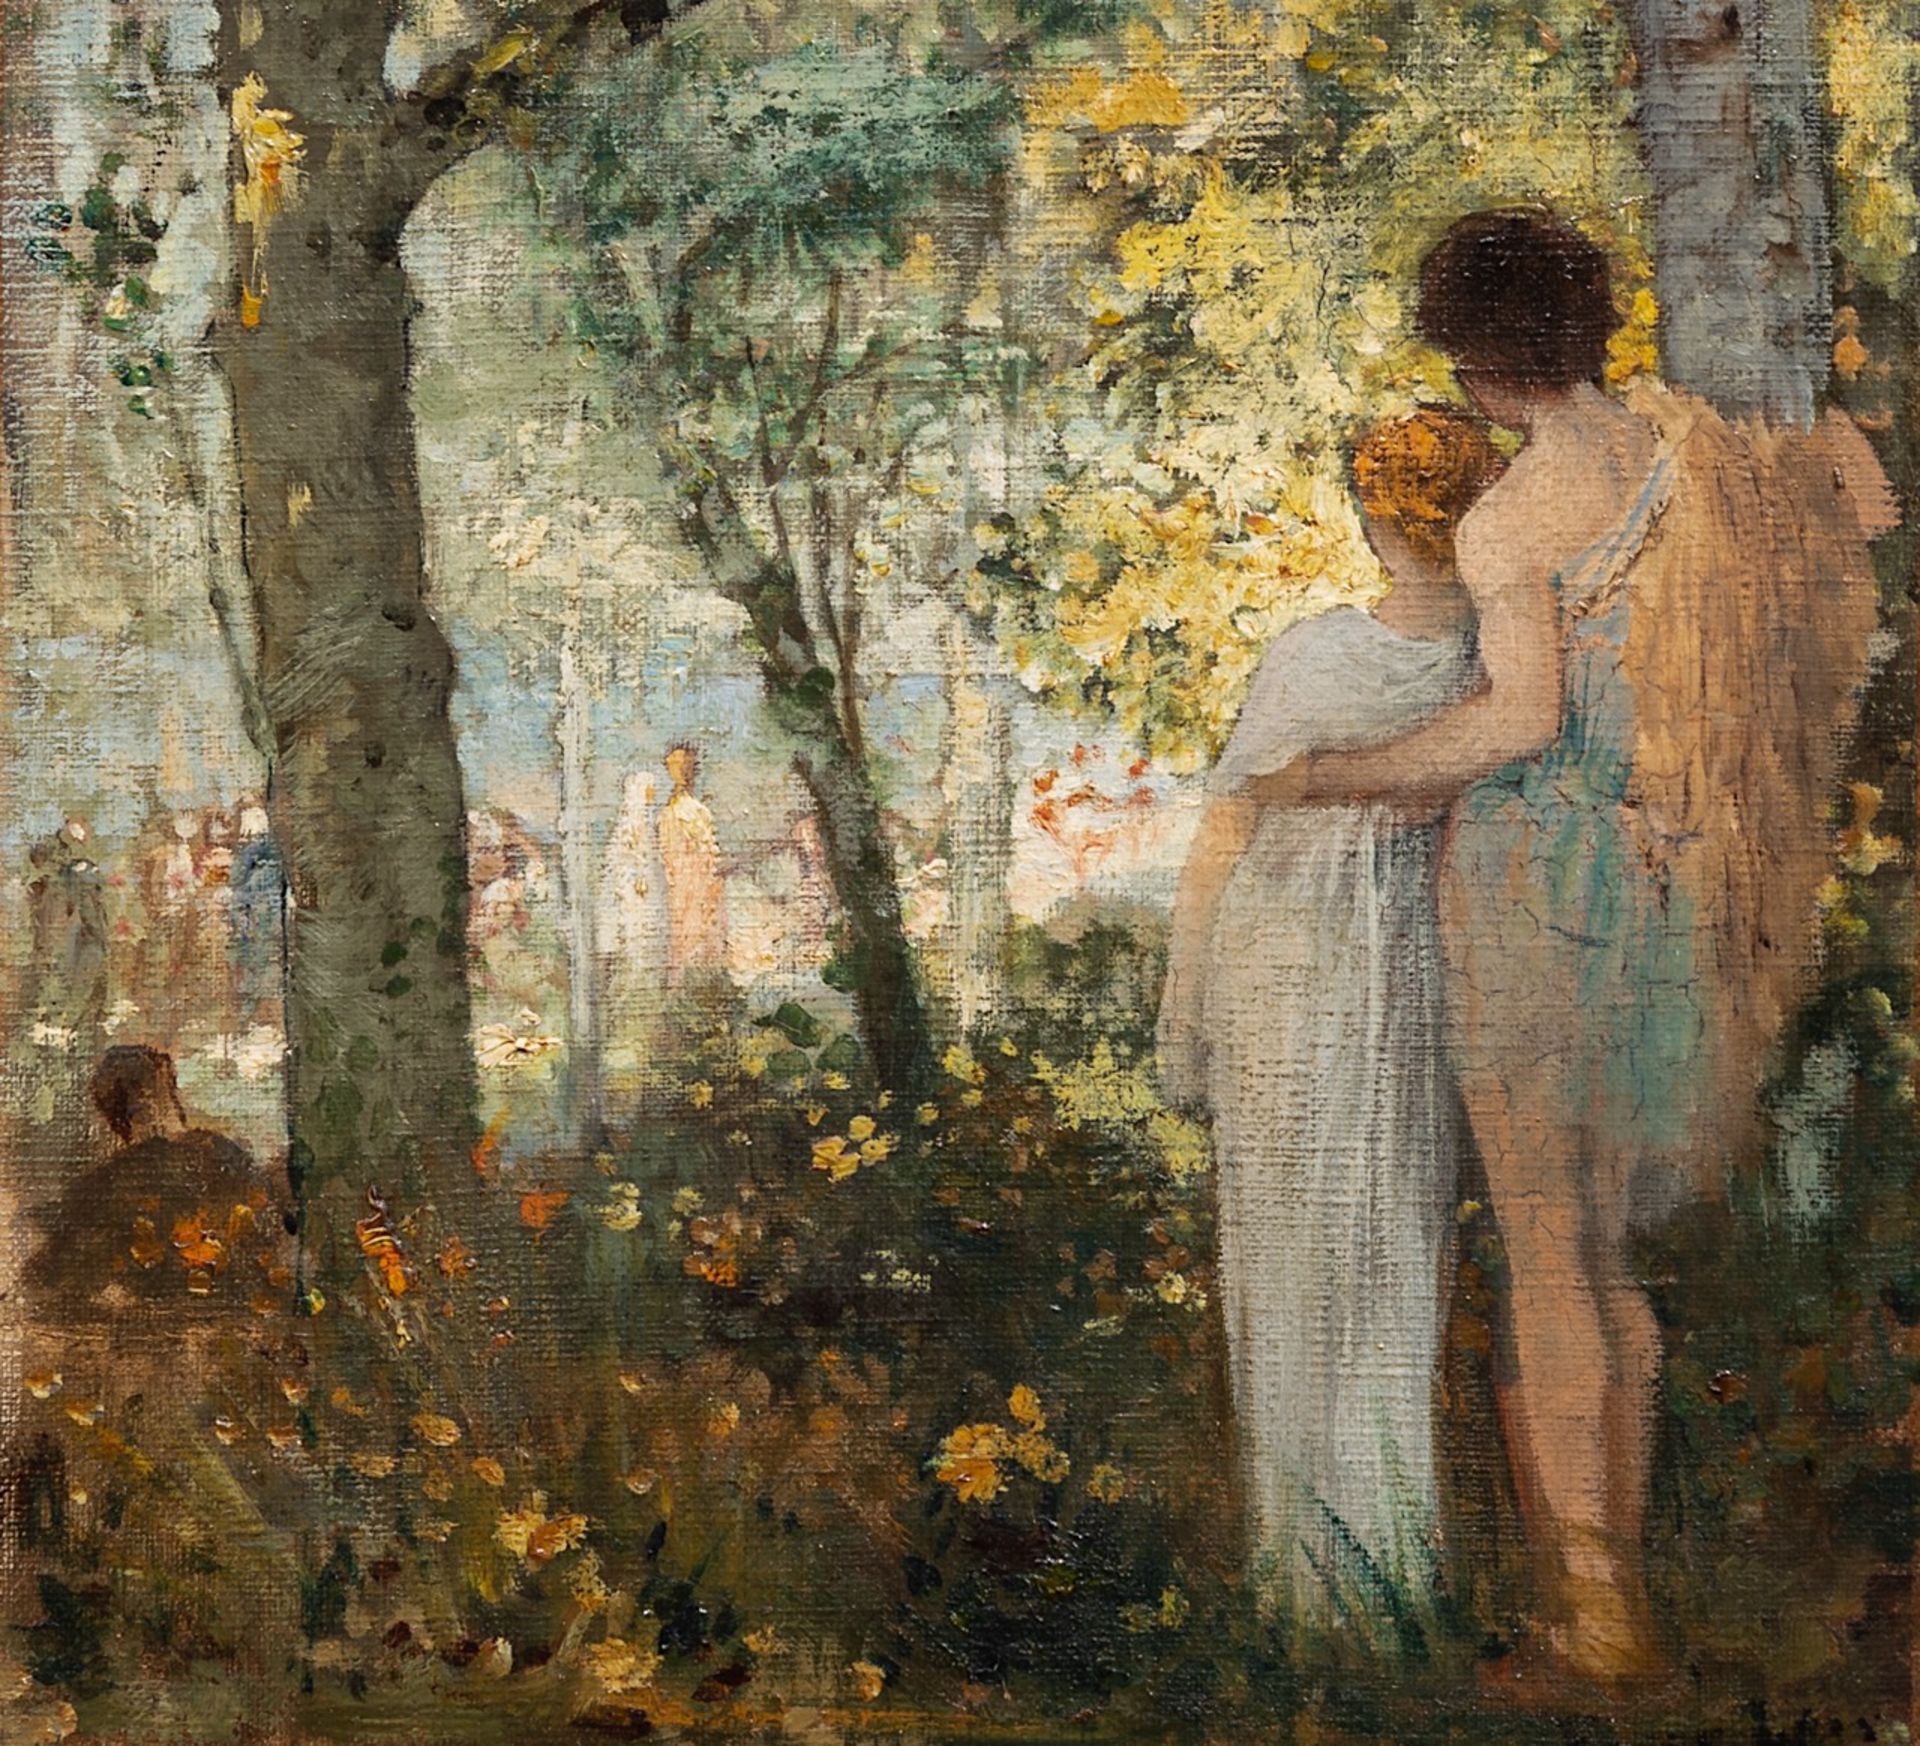 Emile Levy (1826-1890), Romance in the Forest, oil on canvas 27 x 27 cm. (10.6 x 10.6 in.), Frame: 4